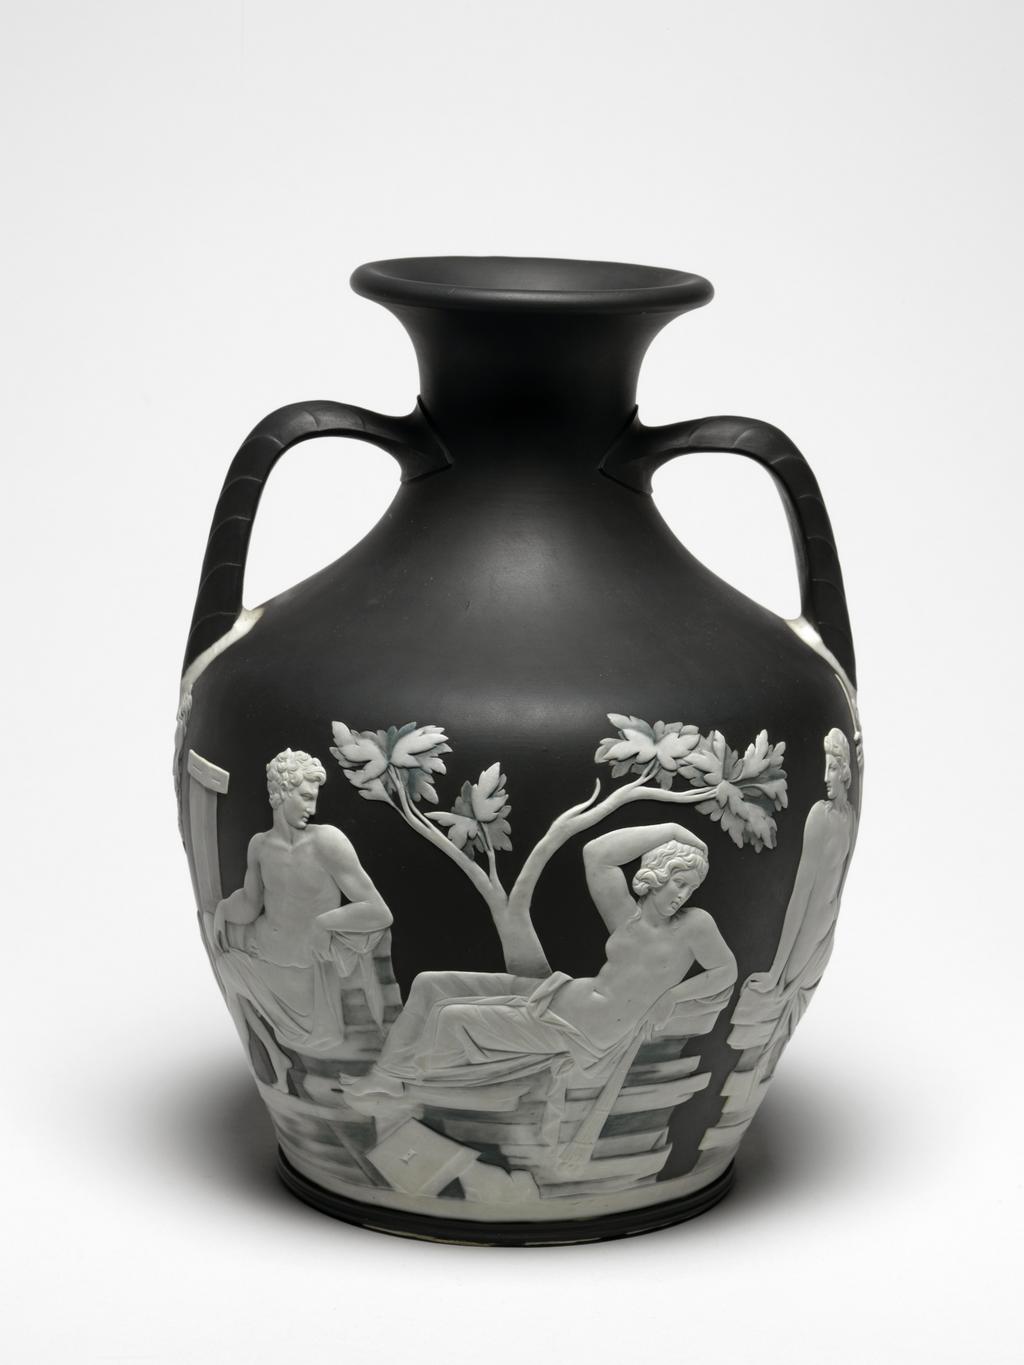 An image of Erasmus Darwin's Wedgwood Copy of the Portland Vase. Wedgwood, Josiah (English potter 1730-1795). Portland Vase copy, blue-black jasperware with applied white reliefs; on the sides classical scenes; on the base, the head of Paris. Squat ovoid body with incurved neck and everted rim, with two elbowed handles, and disk base. Decorated with two scenes separated by bearded male masks below the handles. Reading from left to right: Side 1. Two square pillars supporting an architrave, behind which is a small shrub. In front of the pillars a nude young man holding a drape behind him in his right hand, steps forward to take the arm of a partly draped woman who sits on the ground, looking back at him, and has a snake in her lap. Eros, holding a bow in his left hand and a torch in his right, flies overhead looking back to the young man. On the right, a bearded man stands in three-quarter profile to left, with his right foot on a heap of stones in front of a tree. He rests his chin on his right hand and his right elbow on his right thigh. To the right behind him there is a slender tree. Side 2. A square pillar with a capital, beside which sits a nude young man on a pile of rocks. He has a drape over his right leg, and looks to the right towards a woman, who reclines on pile of rocks in front of a tree. Her lower body is draped, and she holds a torch pointing downwards in her left hand, and has her right arm bent with the hand on her head. In front of her is a square stone with central hole and chamfered edge. On the right is a nude woman, seated on a separate pile of rocks, looking back towards the other two figures. She is partly draped, and holds a sceptre in her left hand. On the base, there is a spray of foliage above the head of a young man, in profile to right, wearing a Phrygian cap, and a cloak, and having his right forefinger to his lips. Solid blue-black jasper, thrown and turned, with applied press-moulded white reliefs, height 25.2 cm, width 19.1 cm. 1789. Neoclassi